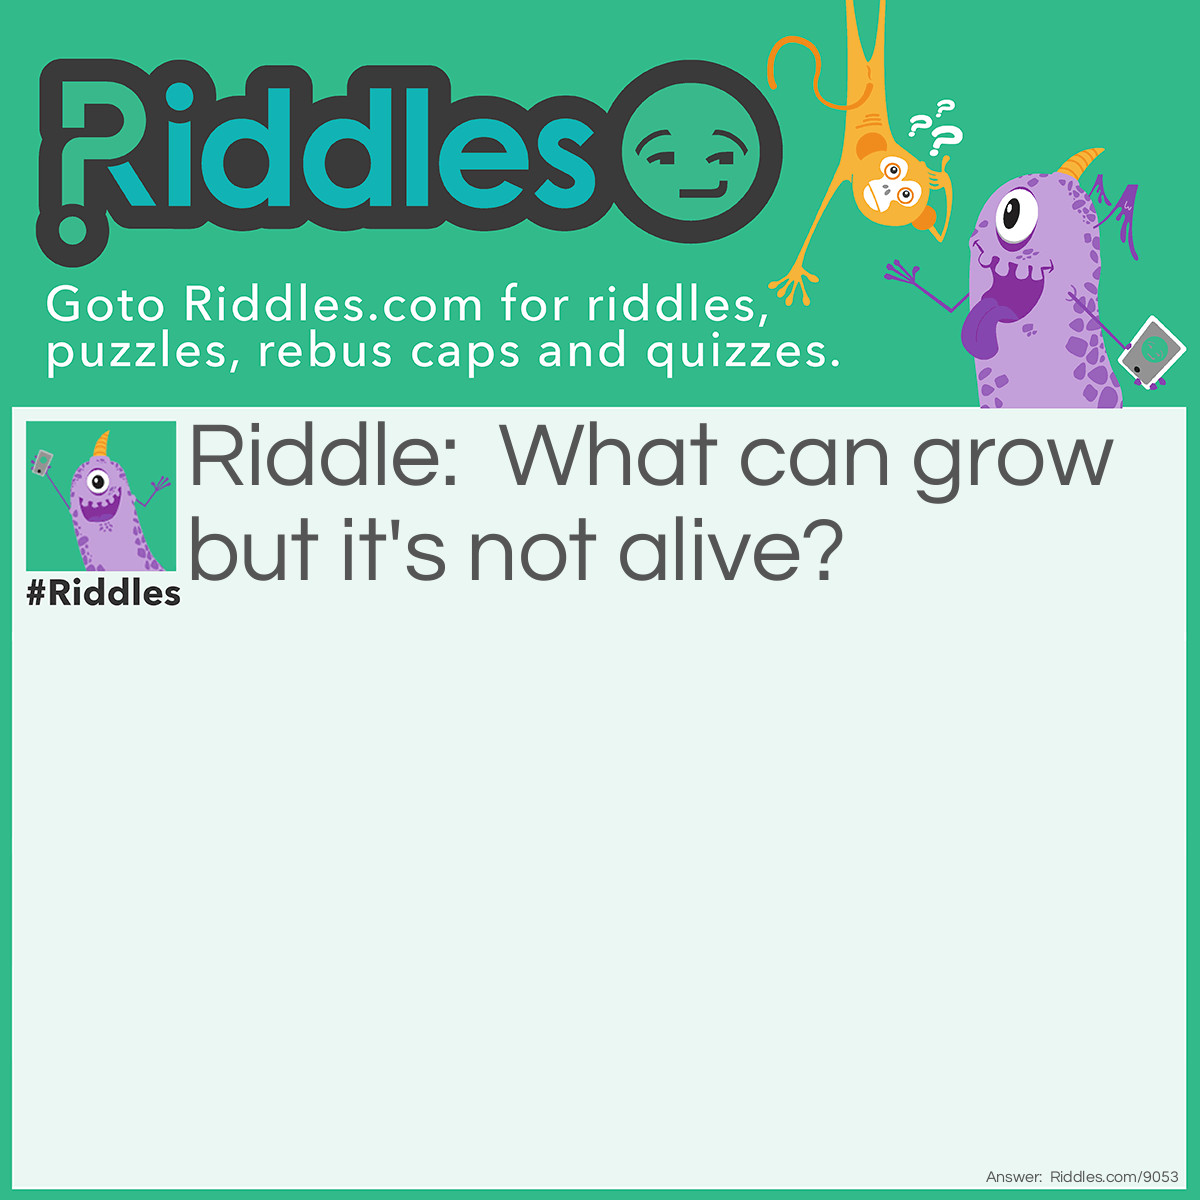 Riddle: What can grow but it's not alive? Answer: Donald trumps bank account! Did you laugh?